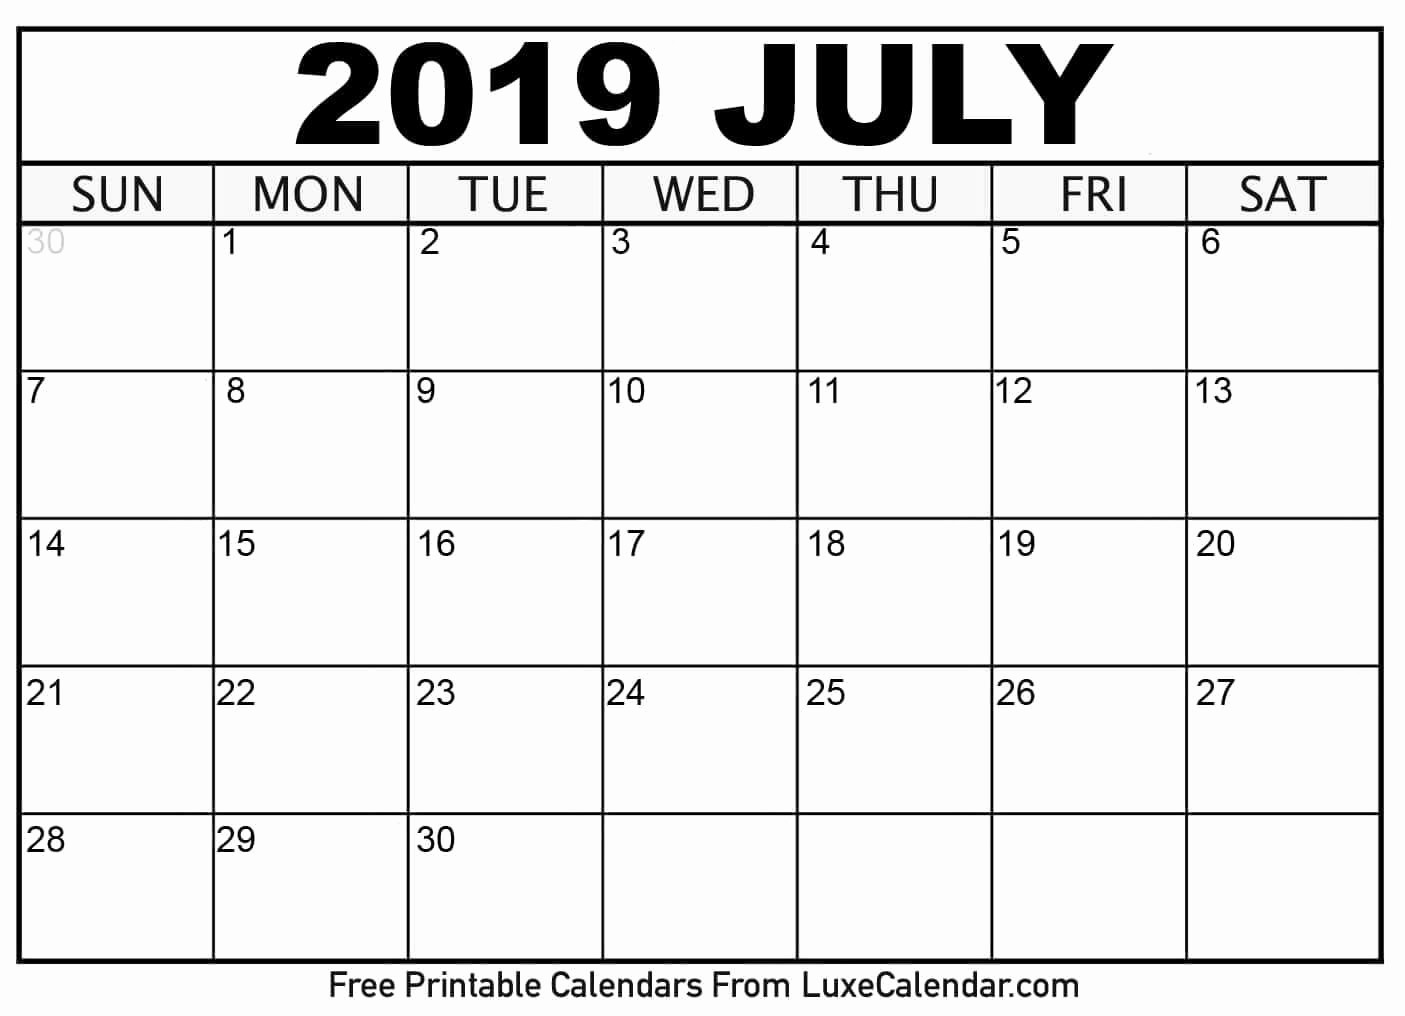 2019 Printable Calendar by Month Awesome Blank July 2019 Printable Calendar Luxe Calendar